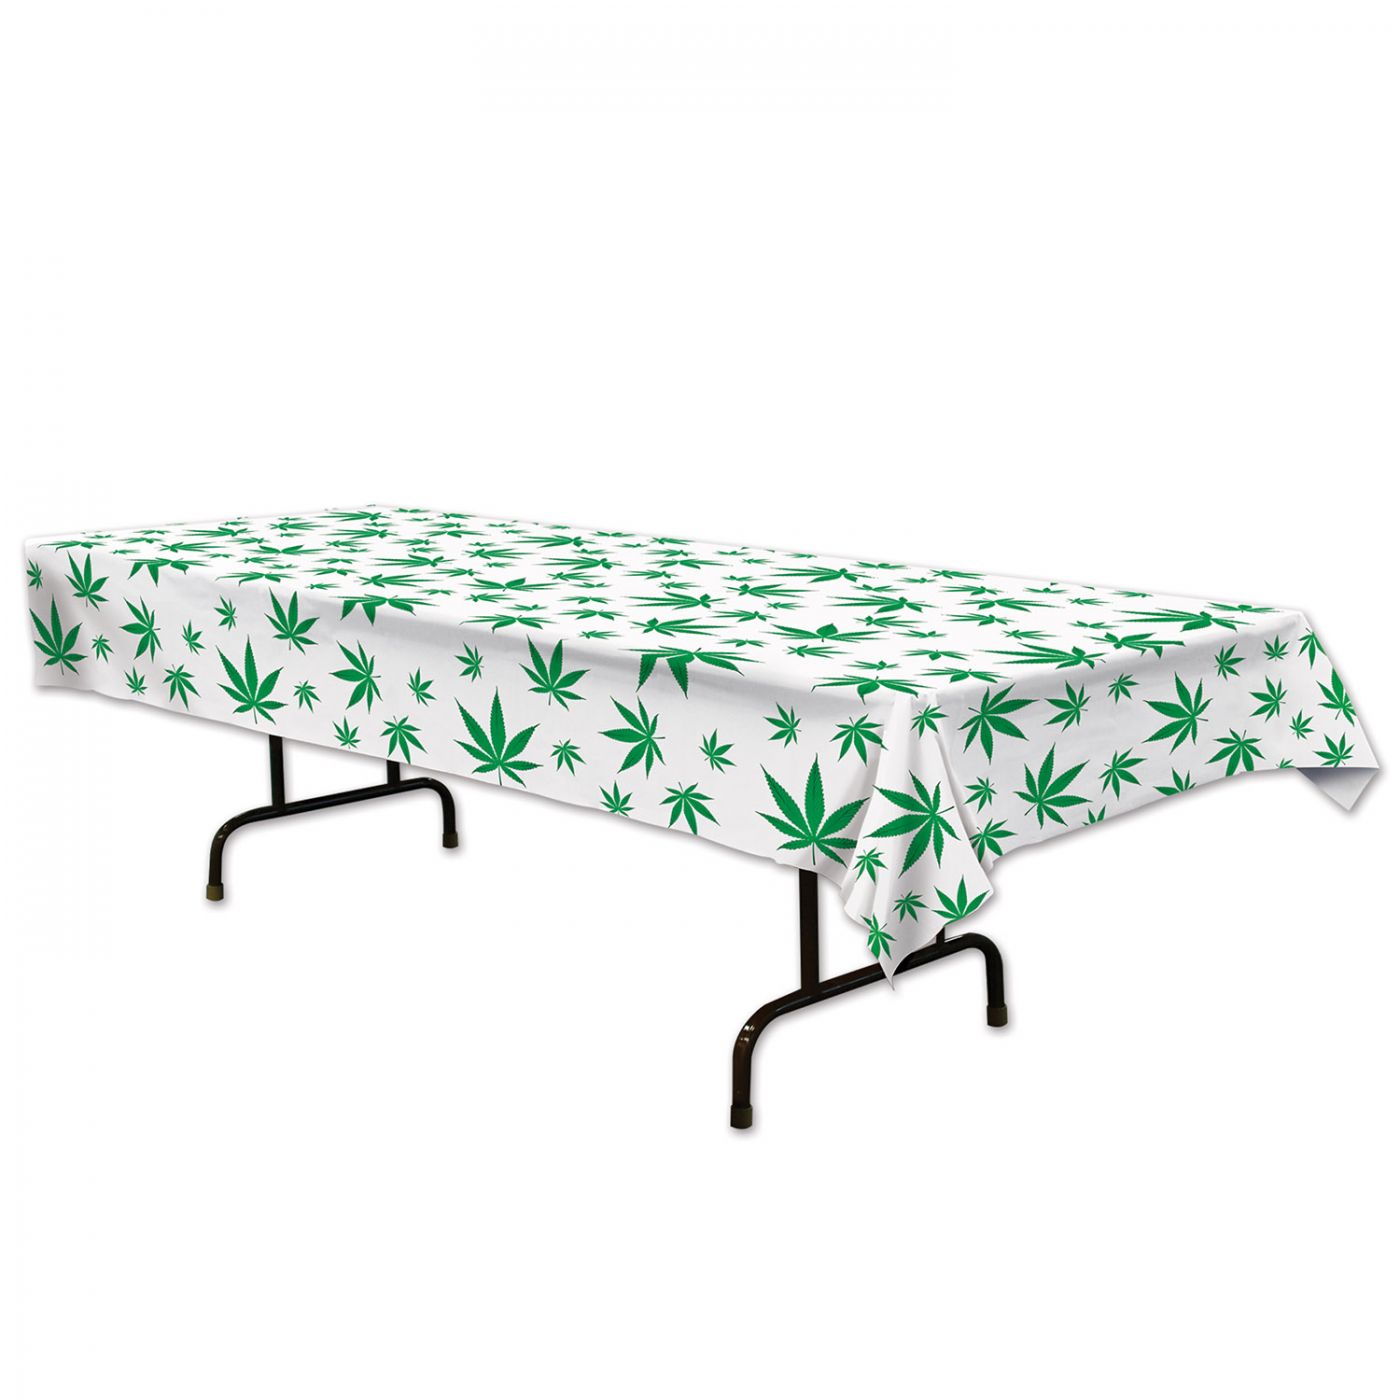 Weed Tablecover image